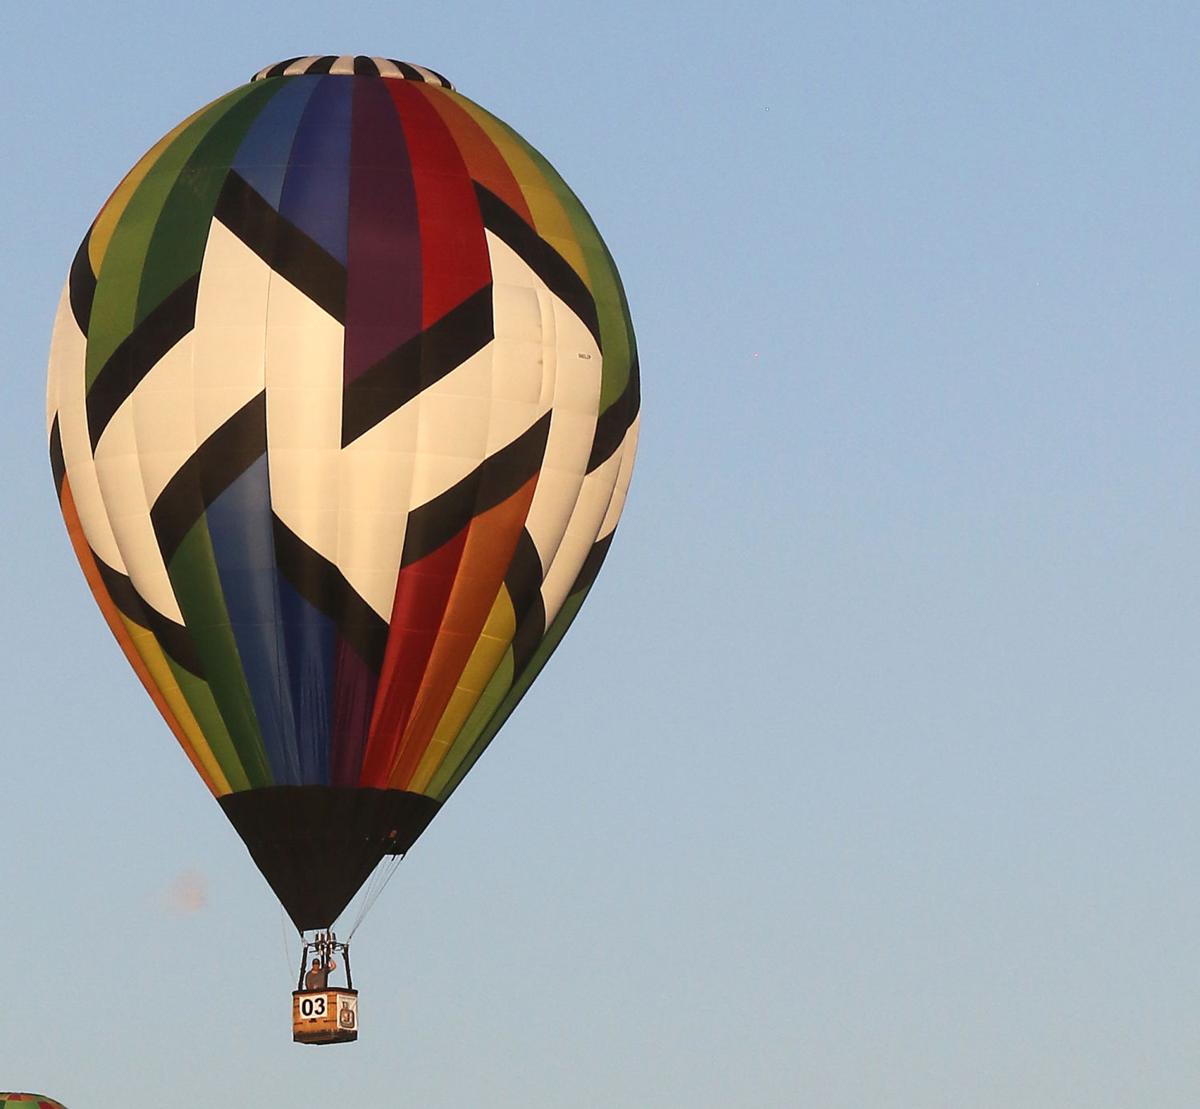 PHOTOS National Hot Air Balloon Results for Day 1 announced Gallery